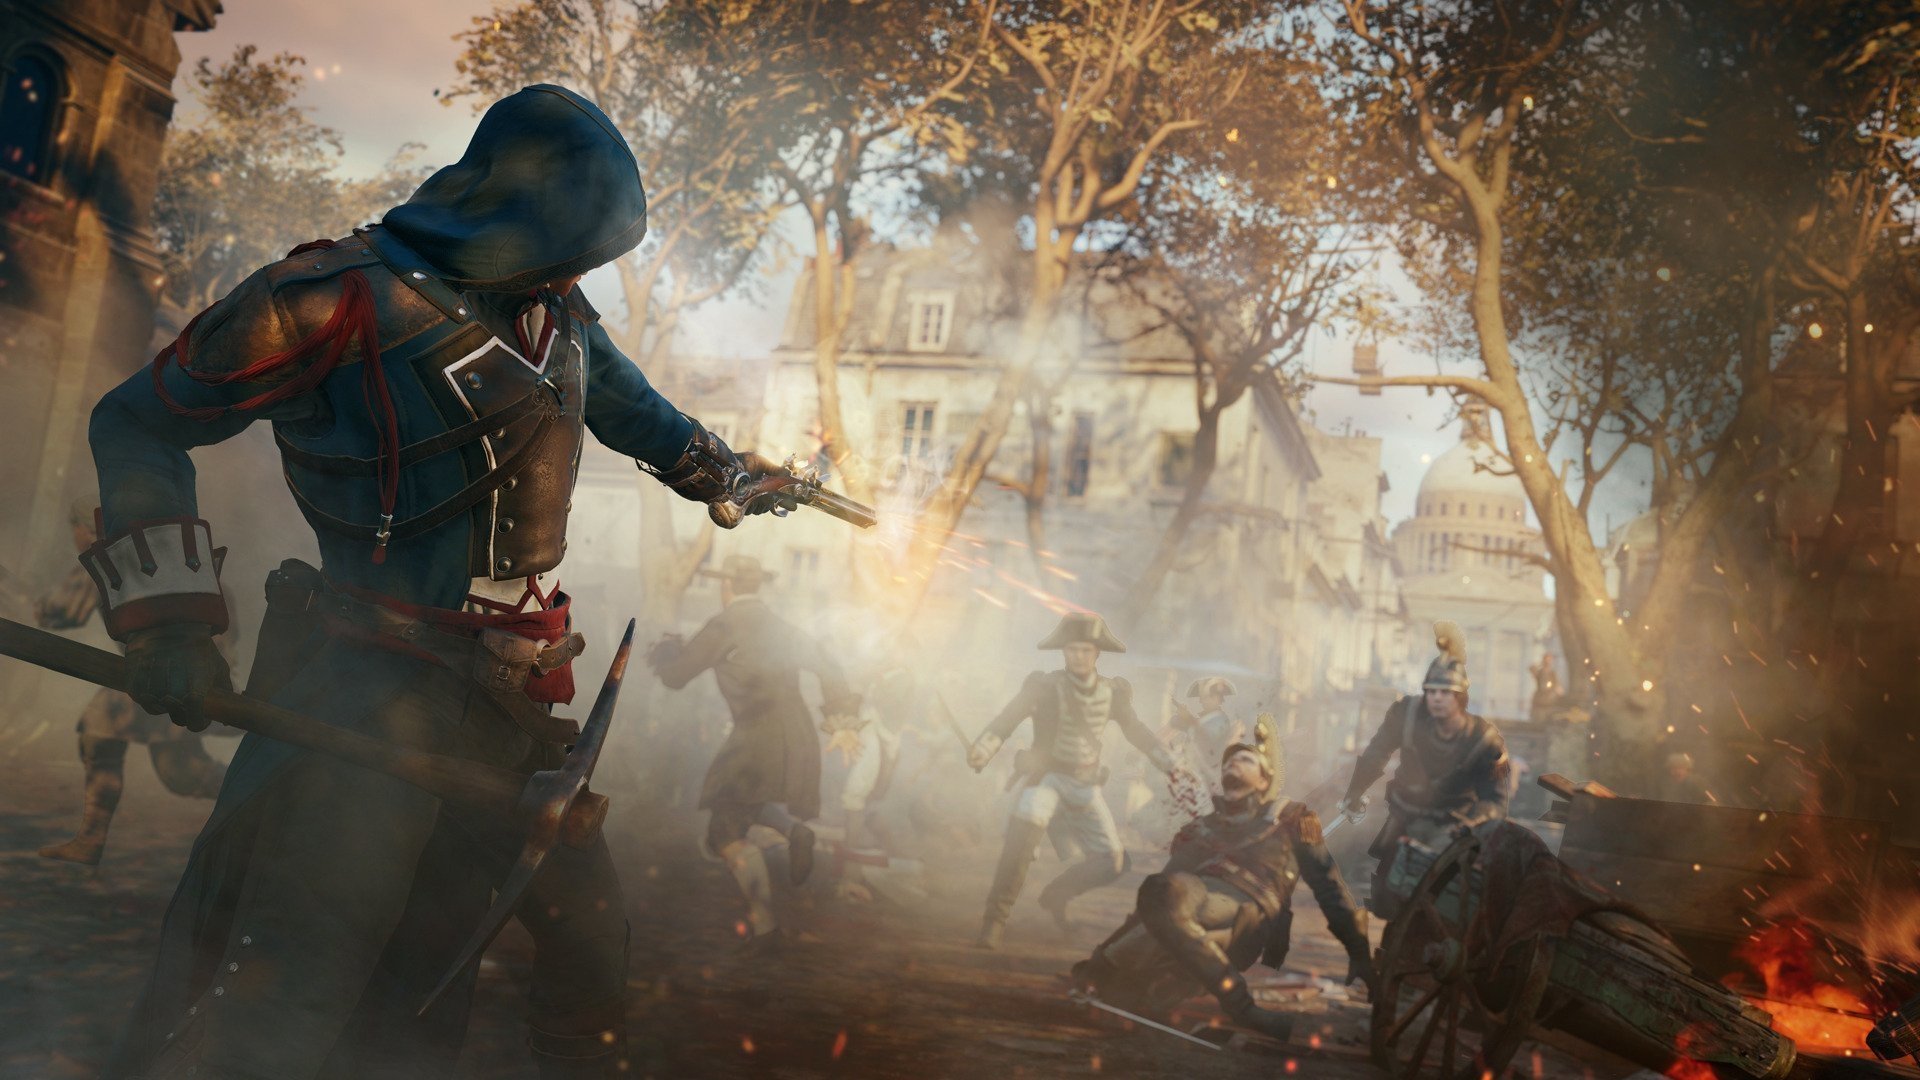 assassin's creed unity wallpaper hd,action adventure game,pc game,battle,art,cg artwork